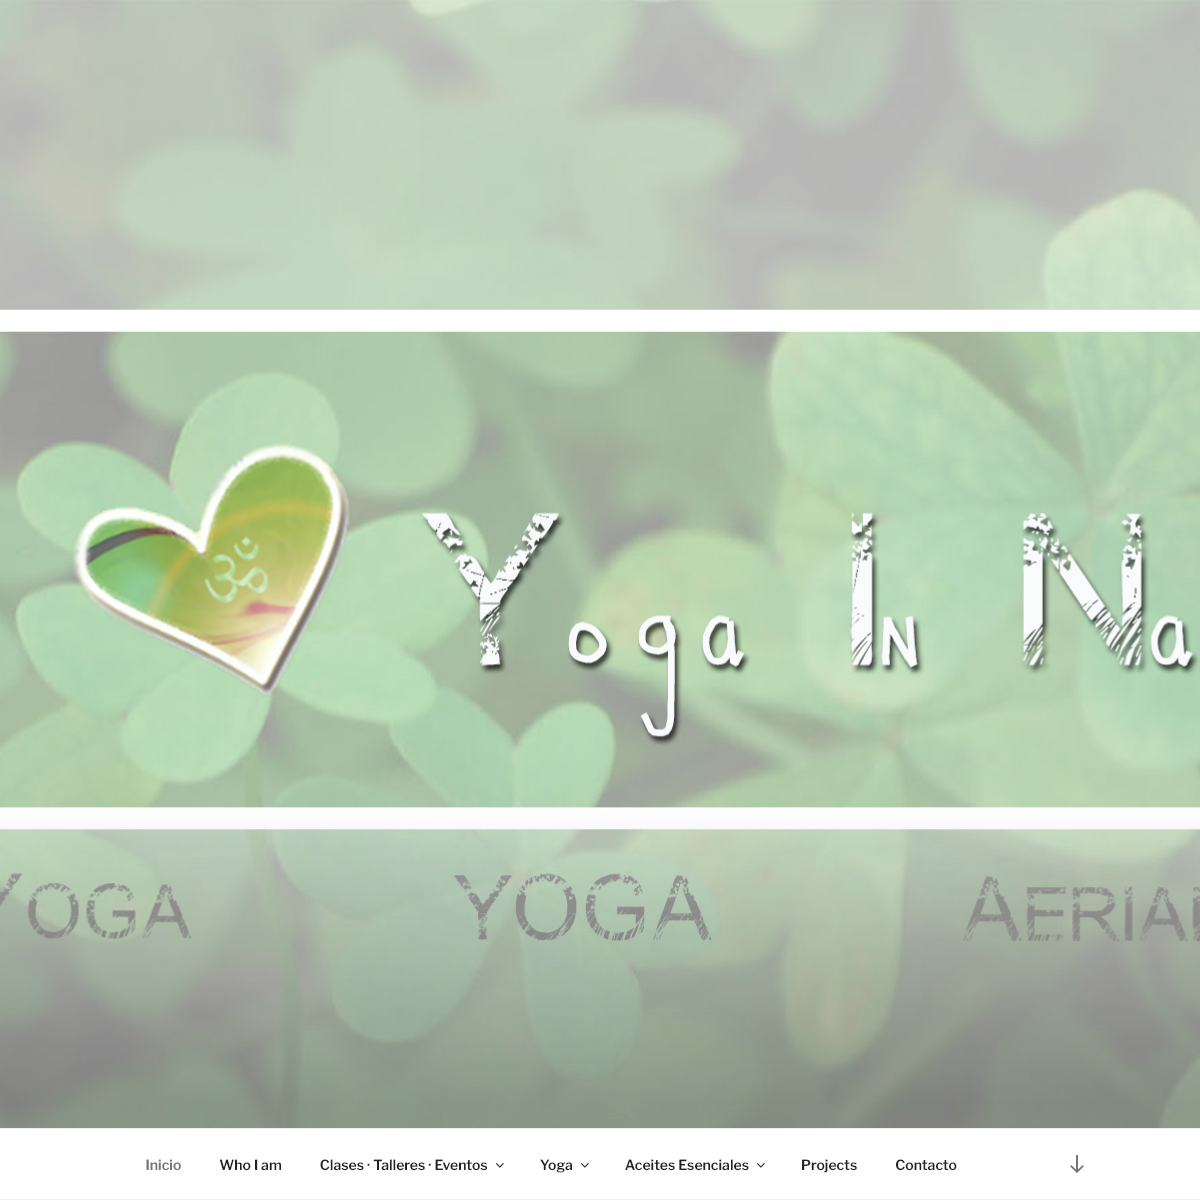 A complete backup of yogainature.com